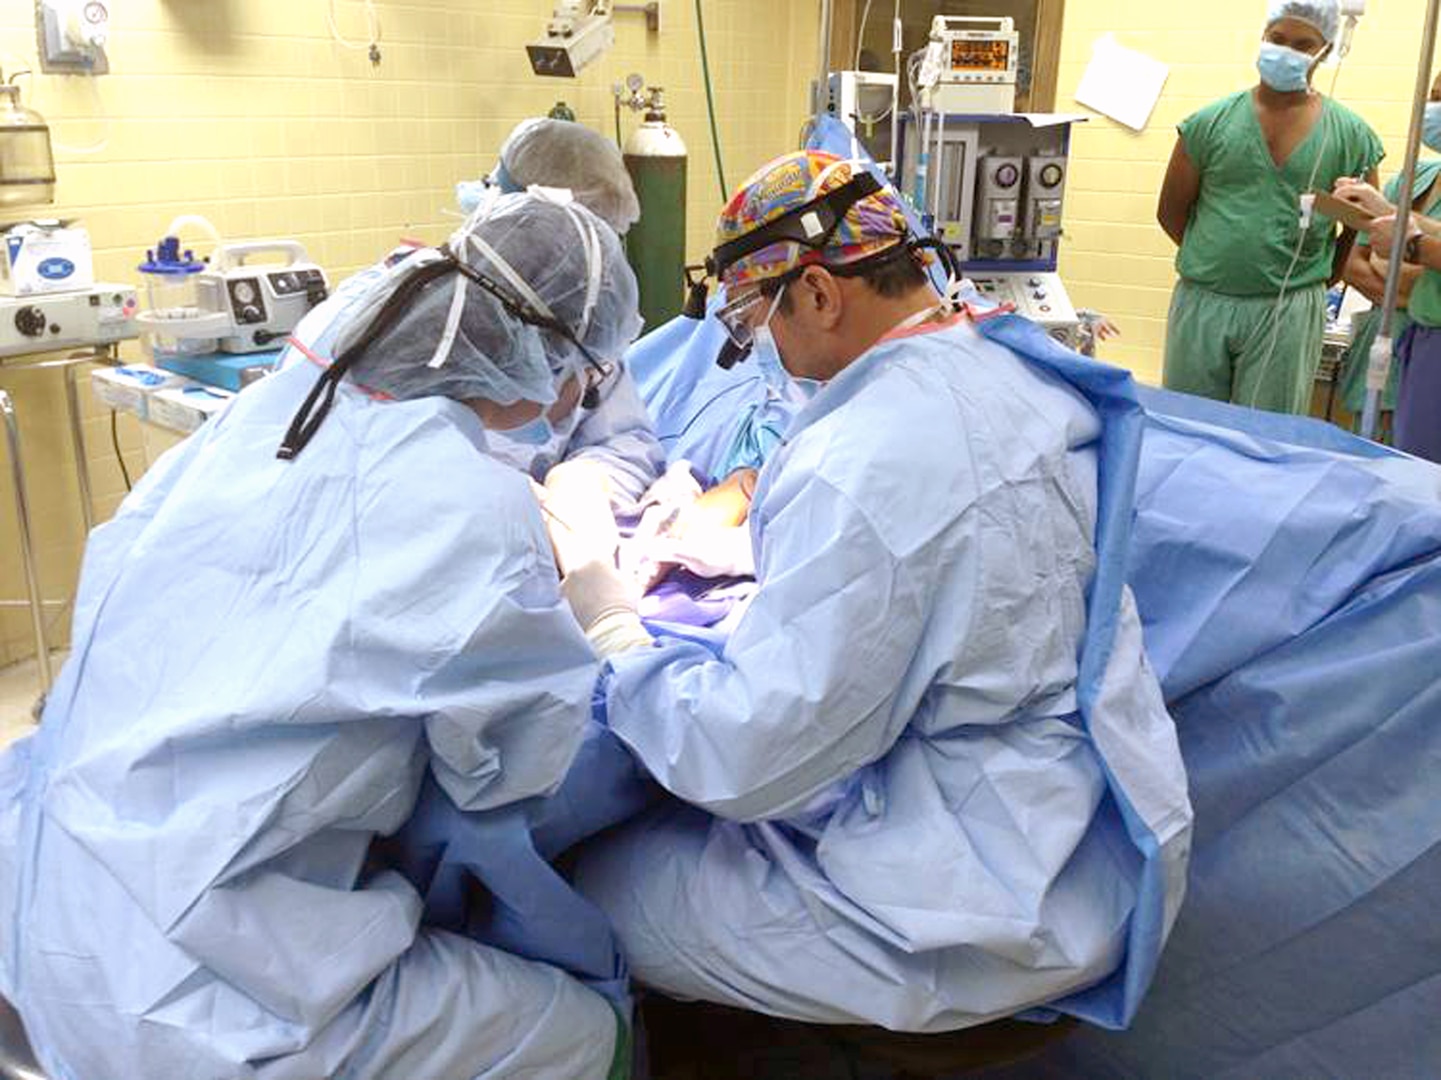 Army Lt. Col. Mickey Cho and Honduran residents work on a case. The Brooke Army Medical Center team conducted a medical readiness exercise in Tegucigalpa, Honduras Sept. 16-30, focusing on orthopedic procedures to hand and arm injuries. (U.S. Army photo/Released)